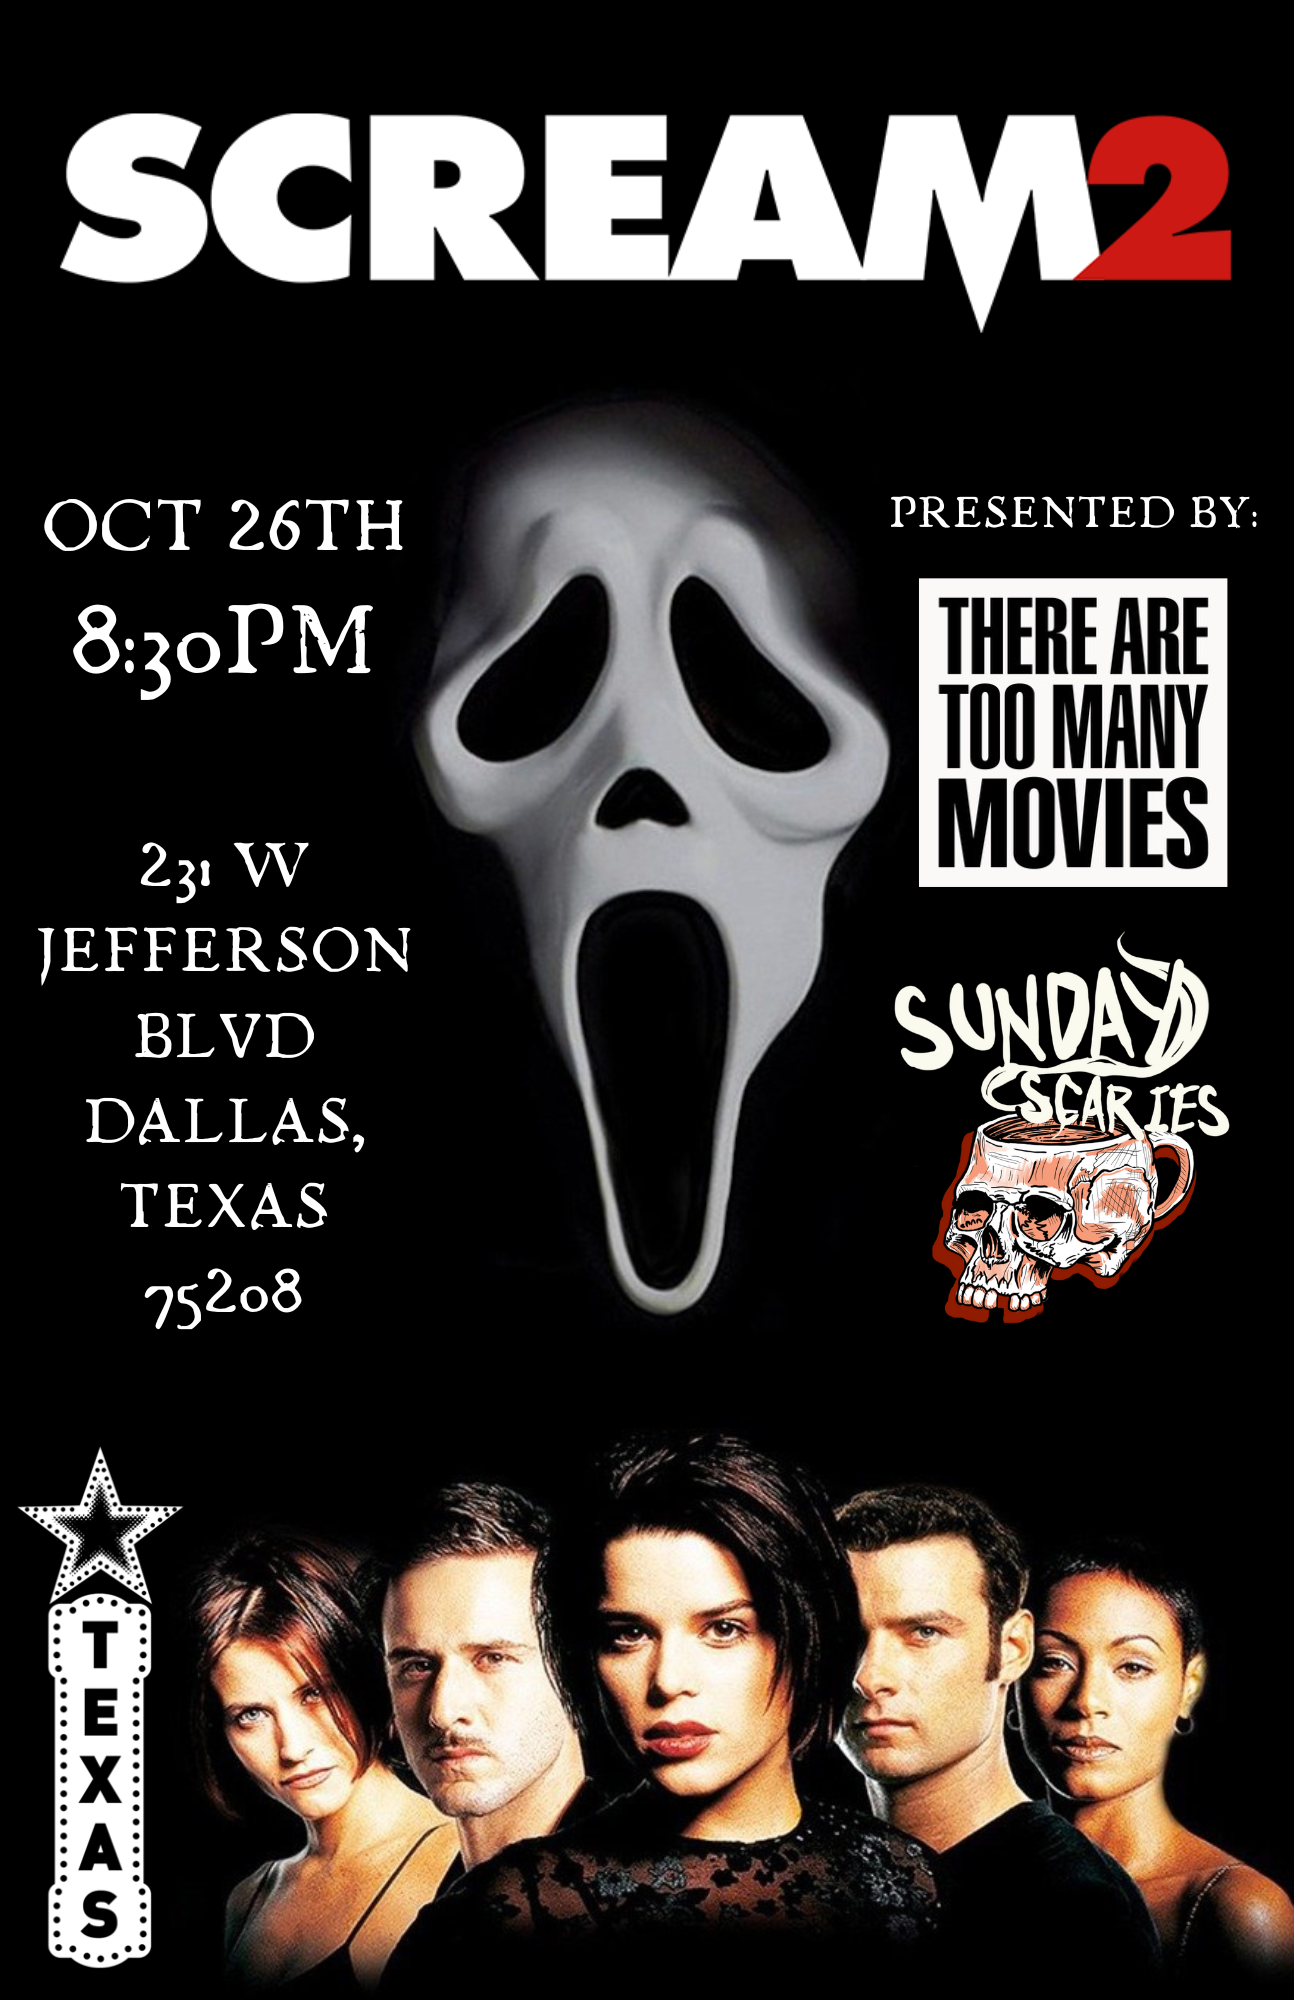 There Are Too Many Movies + Sunday Scaries Podcasts Present: SCREAM 2 Texas Theatre